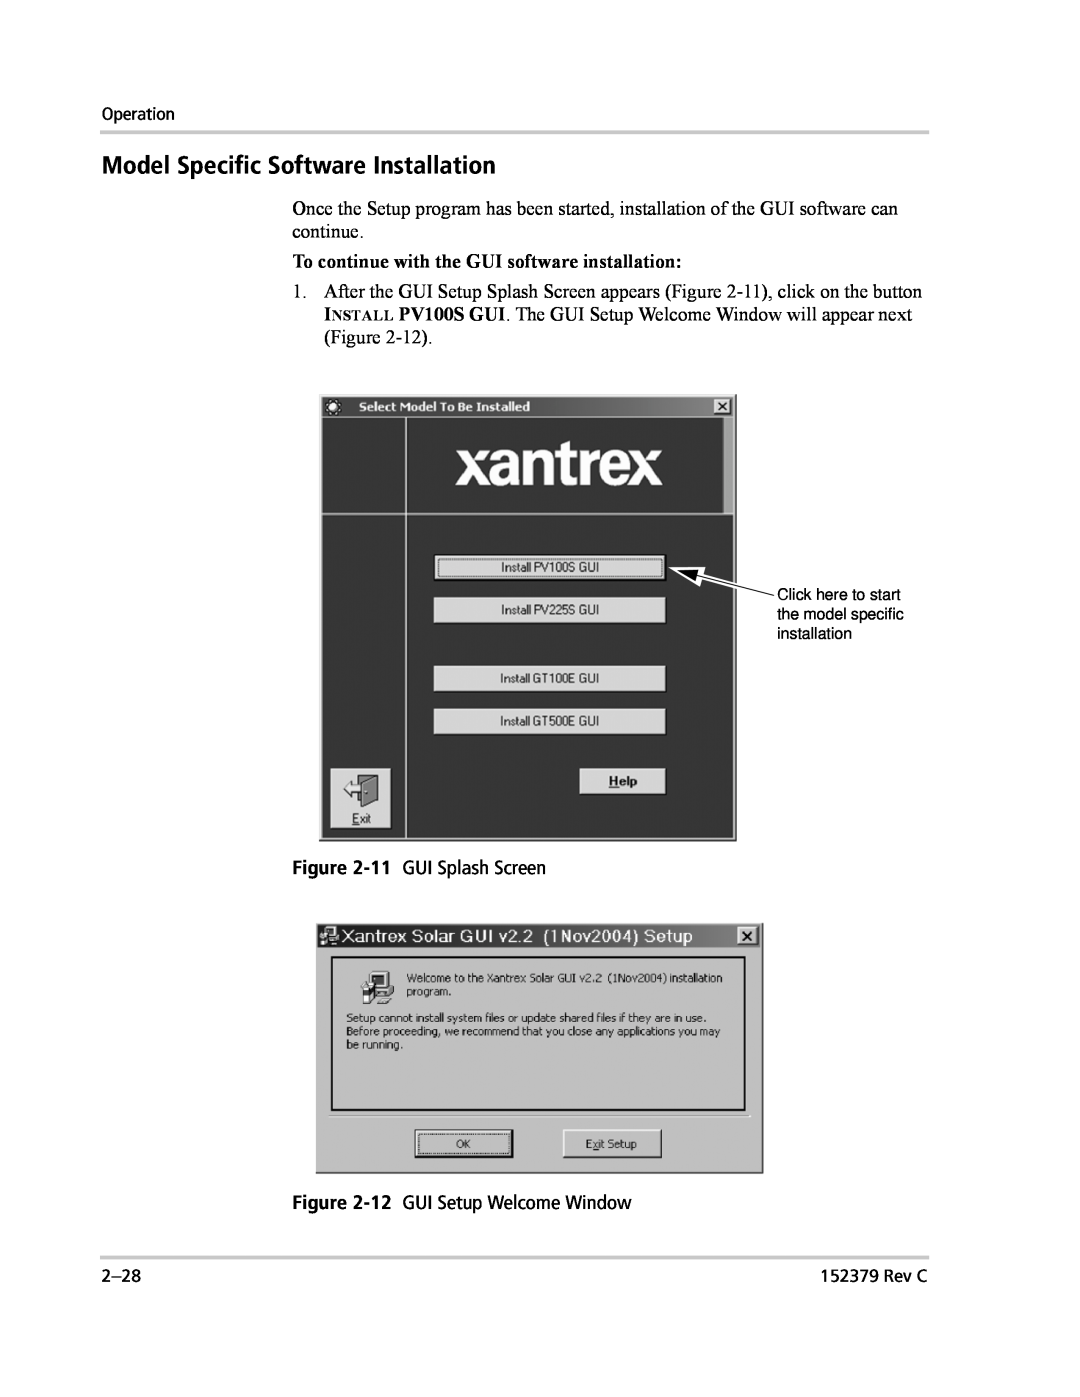 Xantrex Technology PV100S-208 manual Model Specific Software Installation, To continue with the GUI software installation 